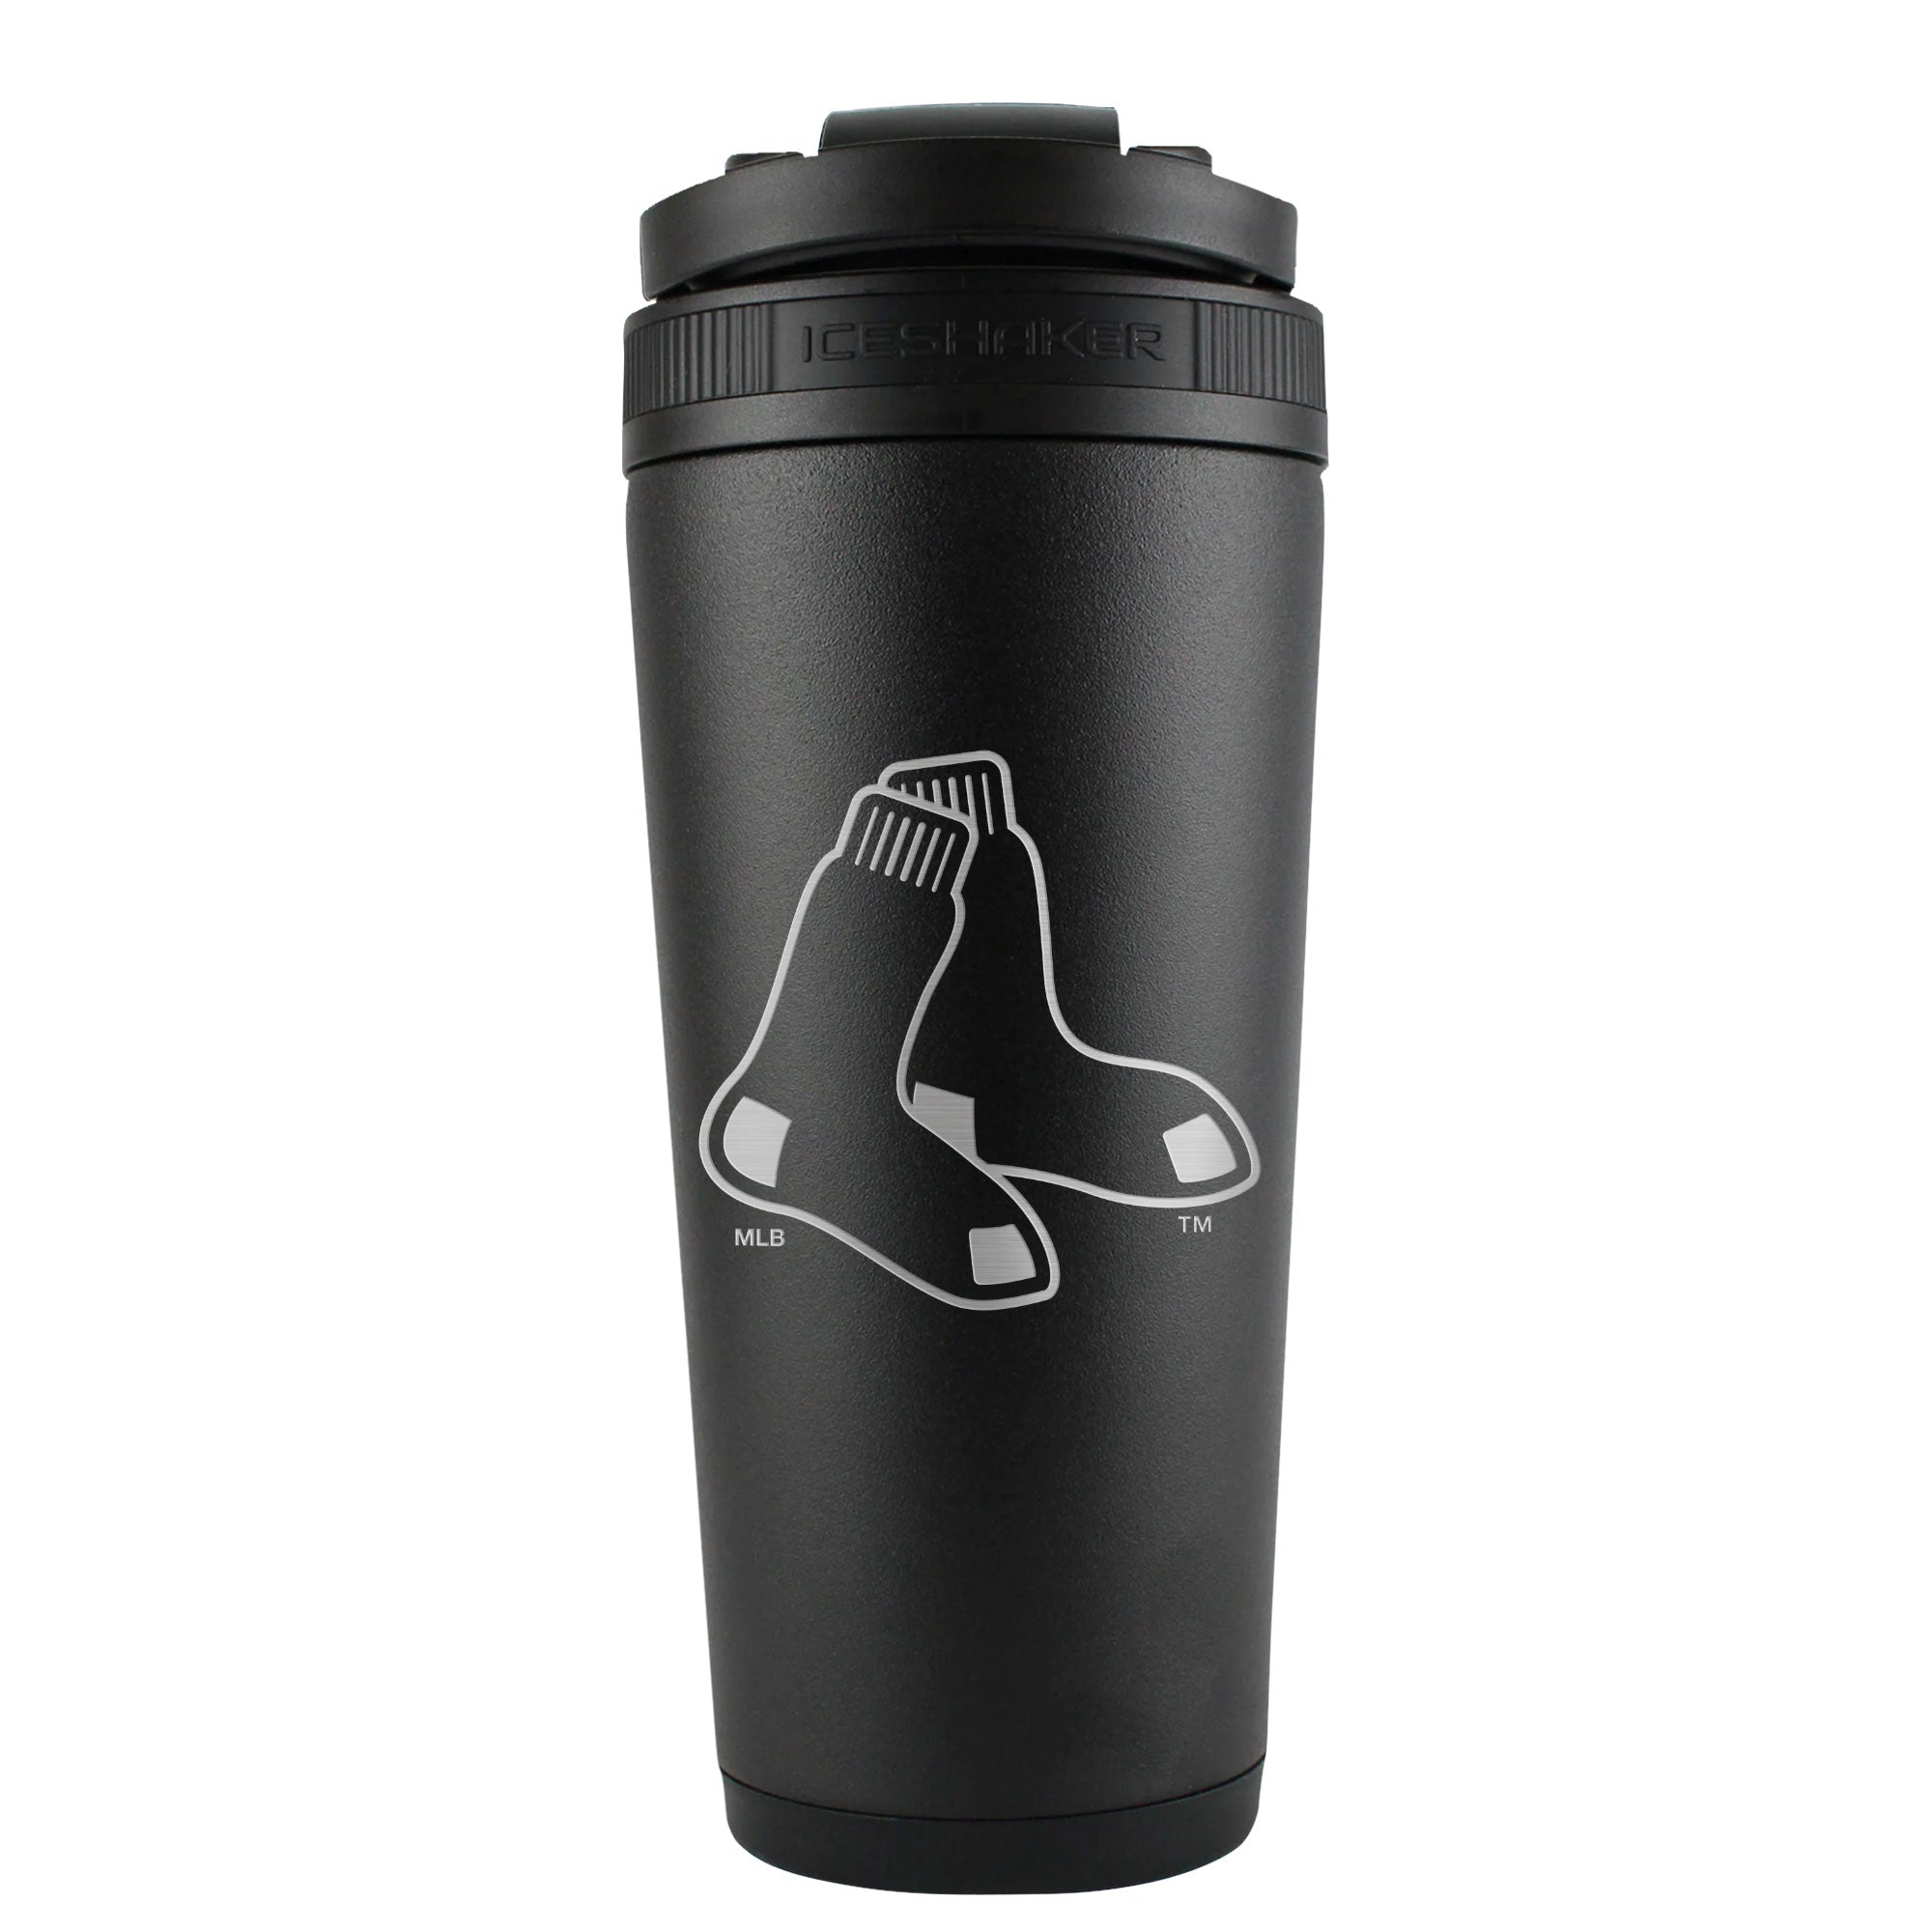 Officially Licensed Boston Red Sox 26oz Ice Shaker - Black